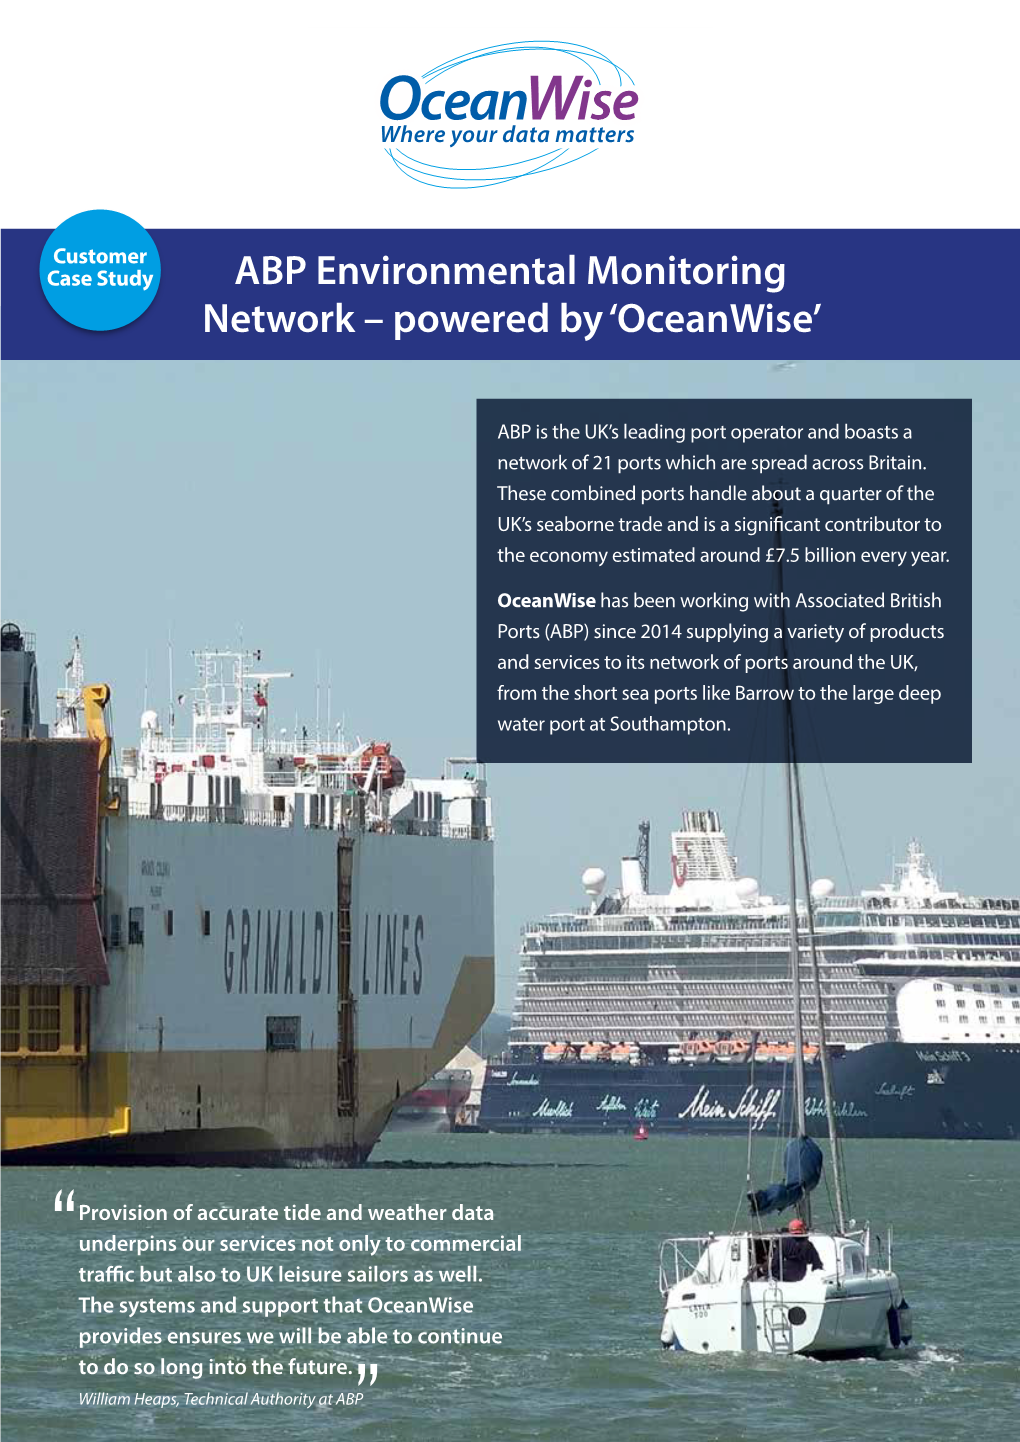 ABP Environmental Monitoring Network – Powered by 'Oceanwise'